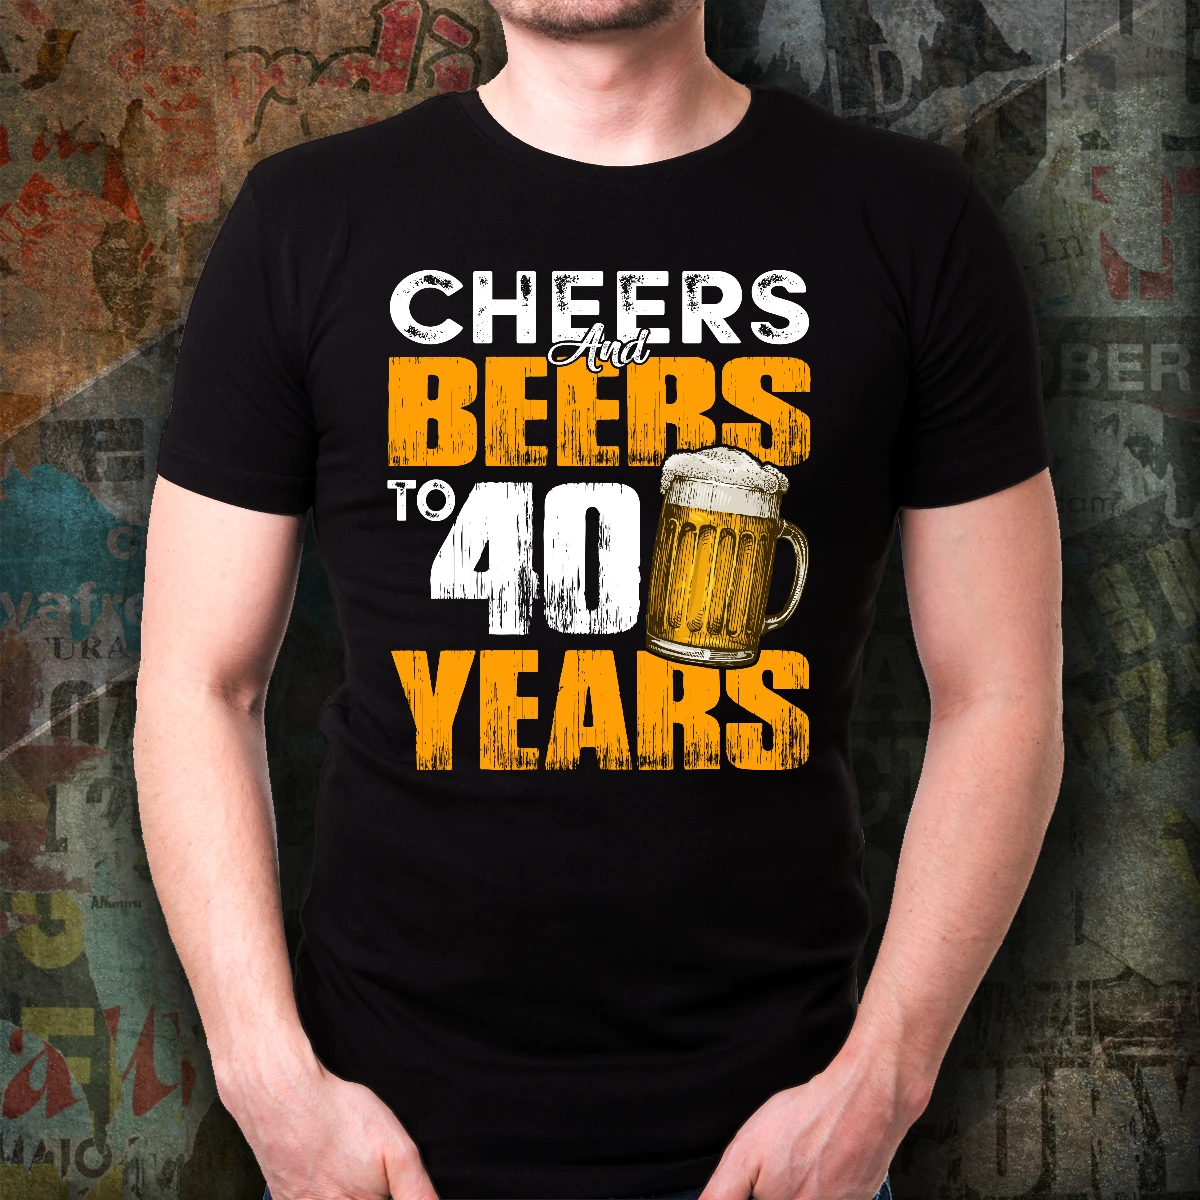 40th Birthday T-shirt | Cheers Beers 40 Years | Funny Beer T-shirts |  Birthday 40 Shirt - T-shirts - Aliexpress